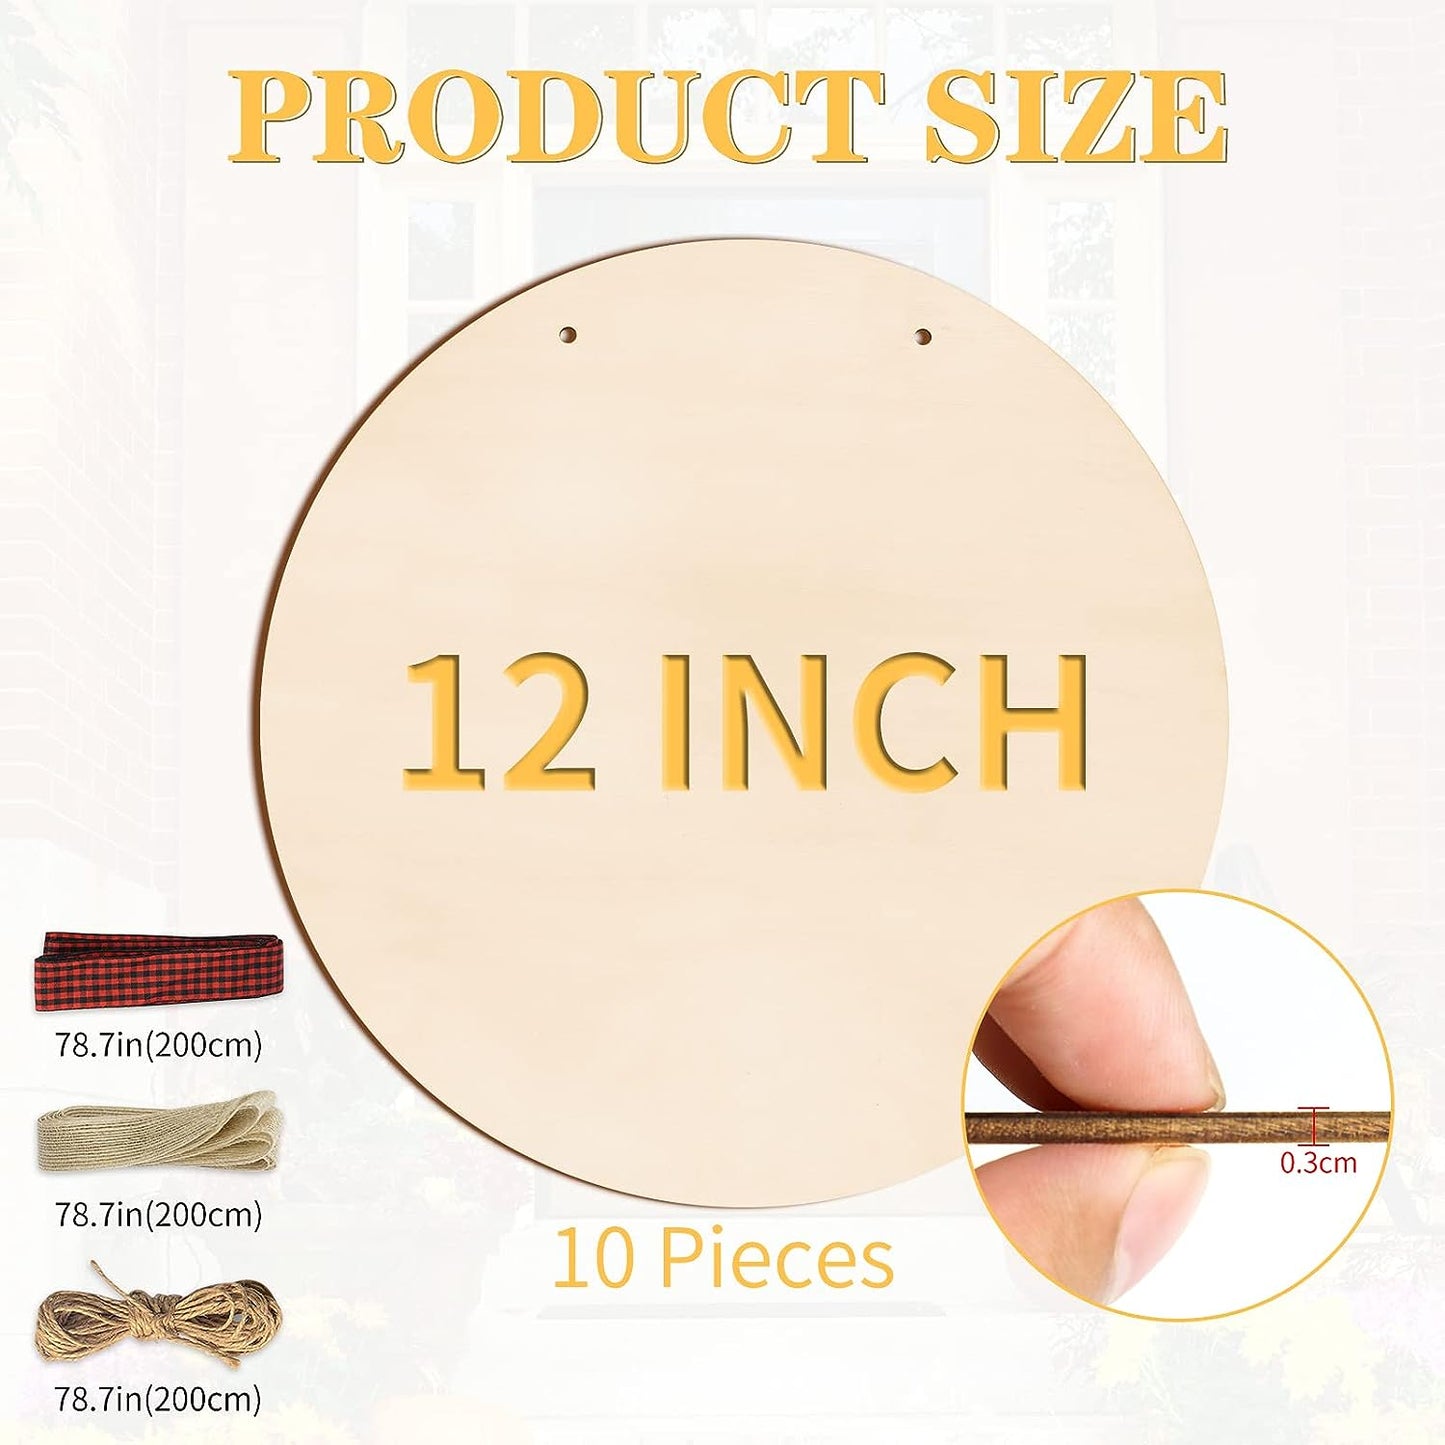 12 Inch Wood Circles for Crafts, 5Pcs Unfinished Wood Crafts, DIY Wood Rounds for Cricut Projects, Door Hanger, Wood Burning, Painting, Independence Day Decor, Holiday Home Decorations (5PCS)